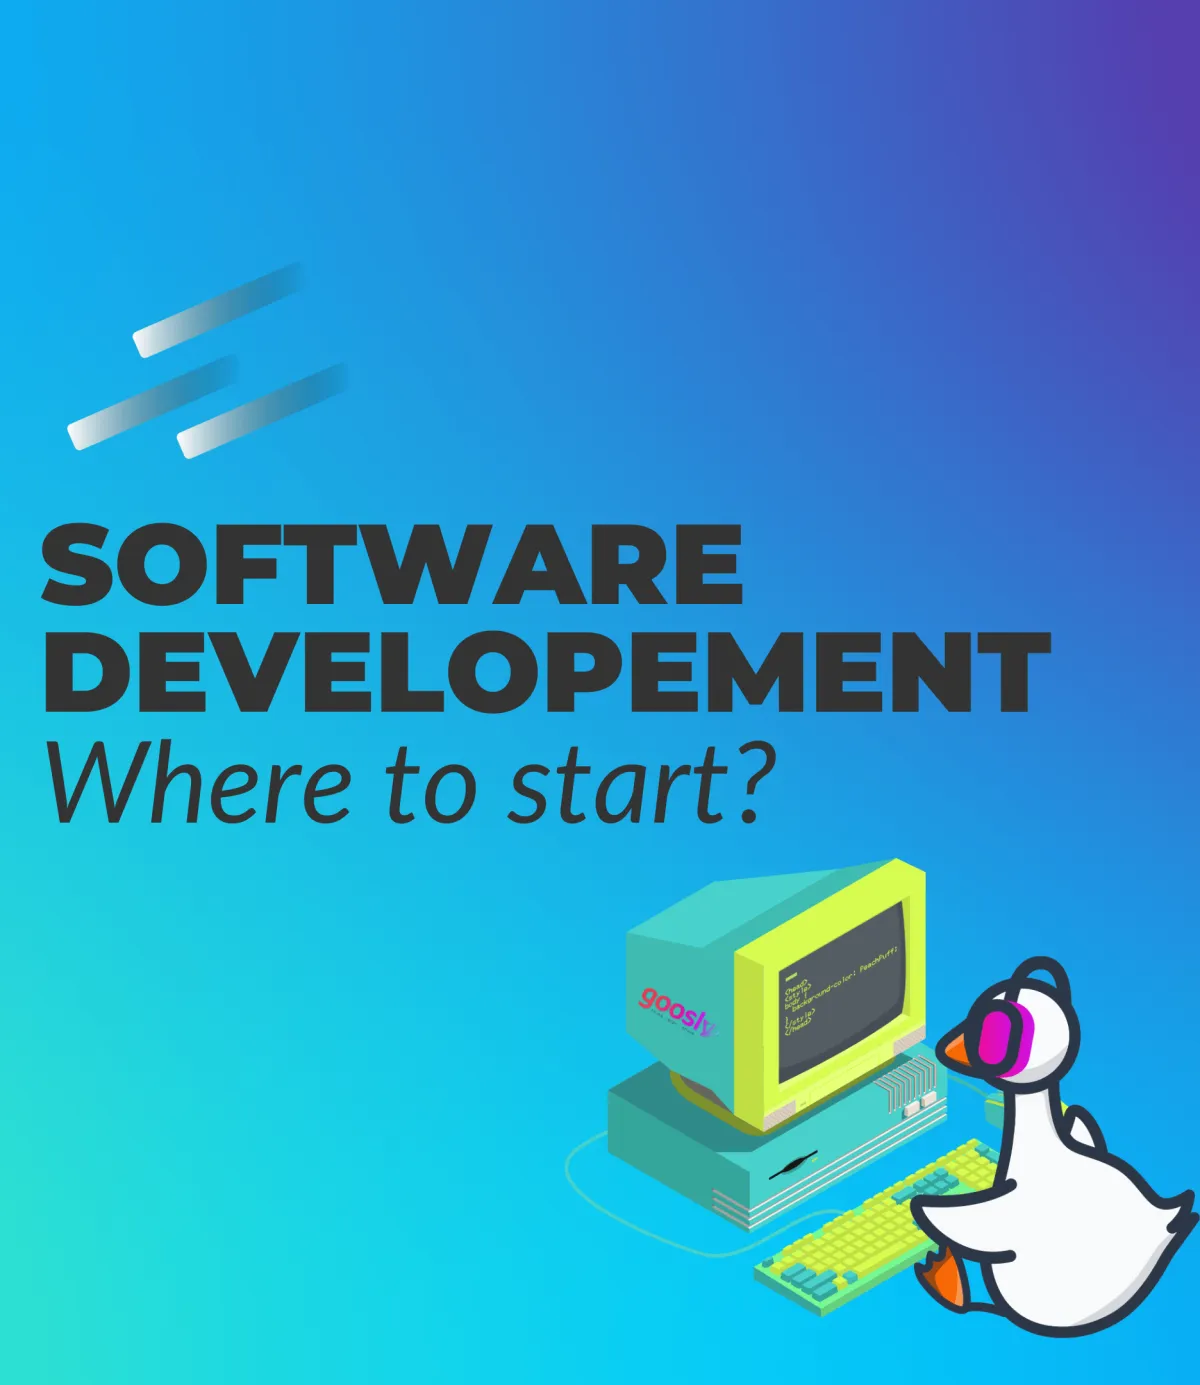 How to do Planning for Software Development